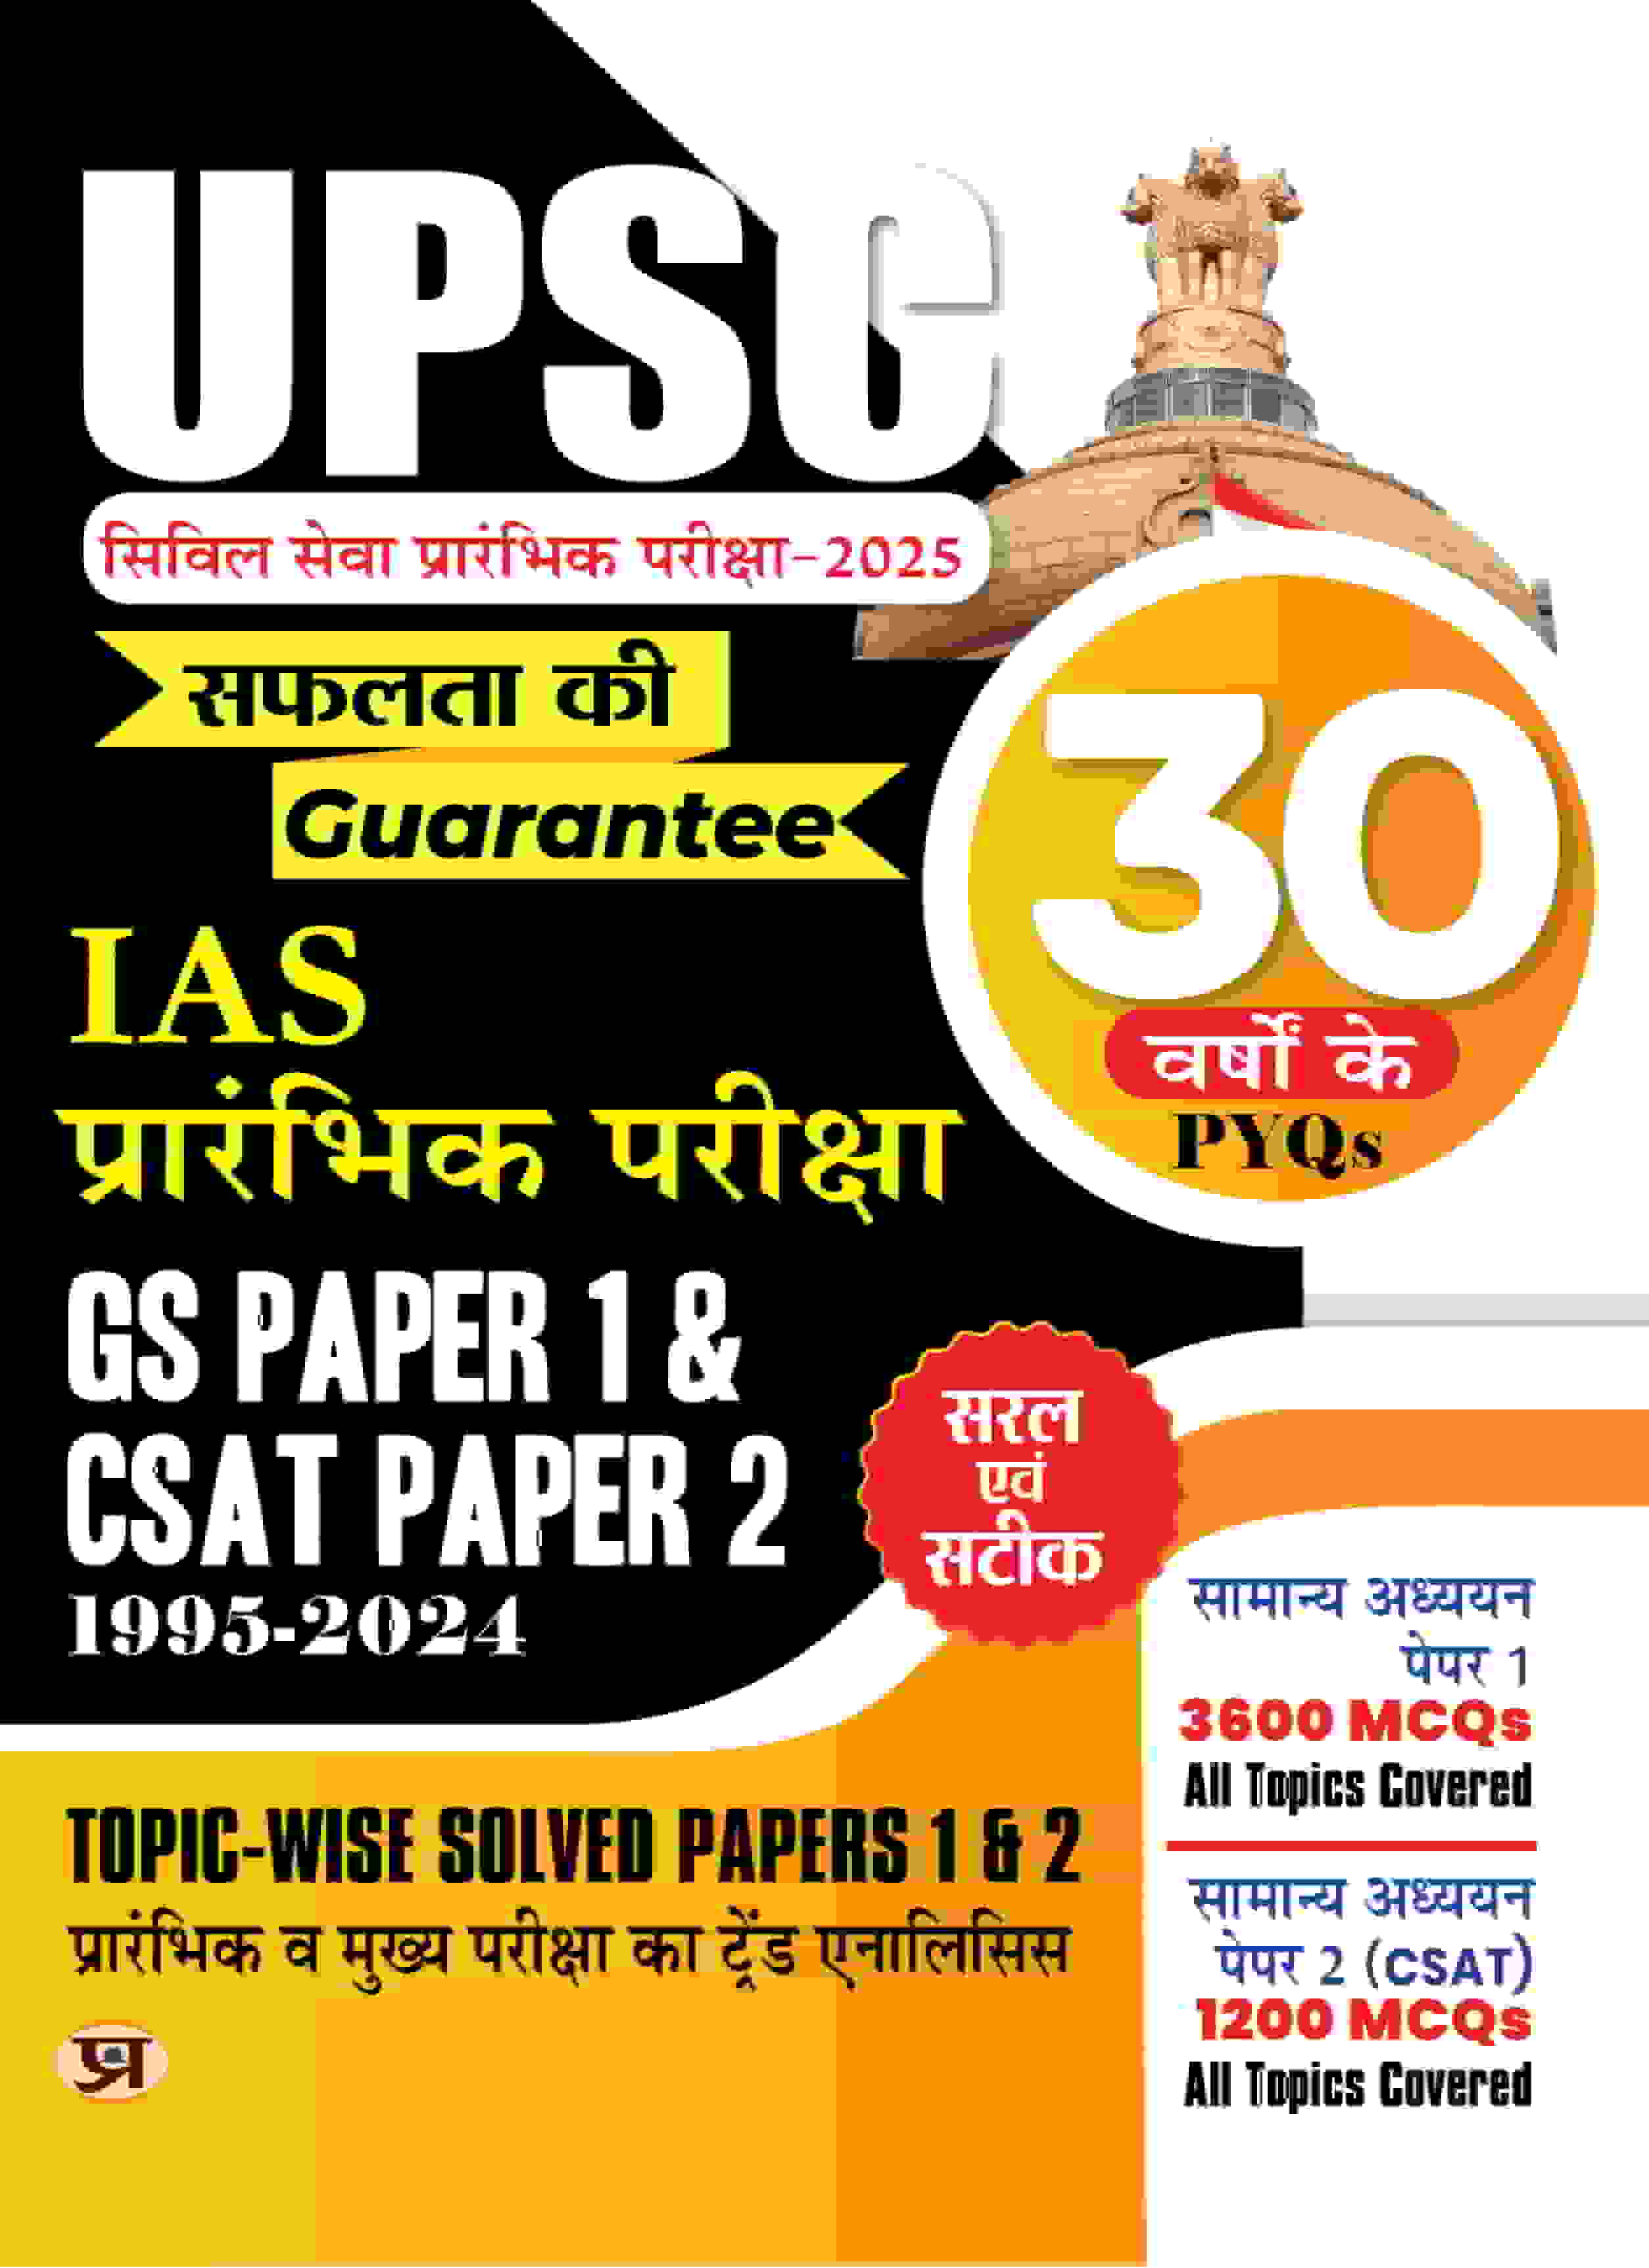 30 Years UPSC Prelims Civil Services Exam 2025 | IAS Prelims Topic-wise Solved Papers 1 & 2 (1995-2024) | General Studies & Aptitude (CSAT) MCQs | PYQs Previous Year Questions Bank Guide Book in Hindi (UPSC 30 Years Solved Prelims)